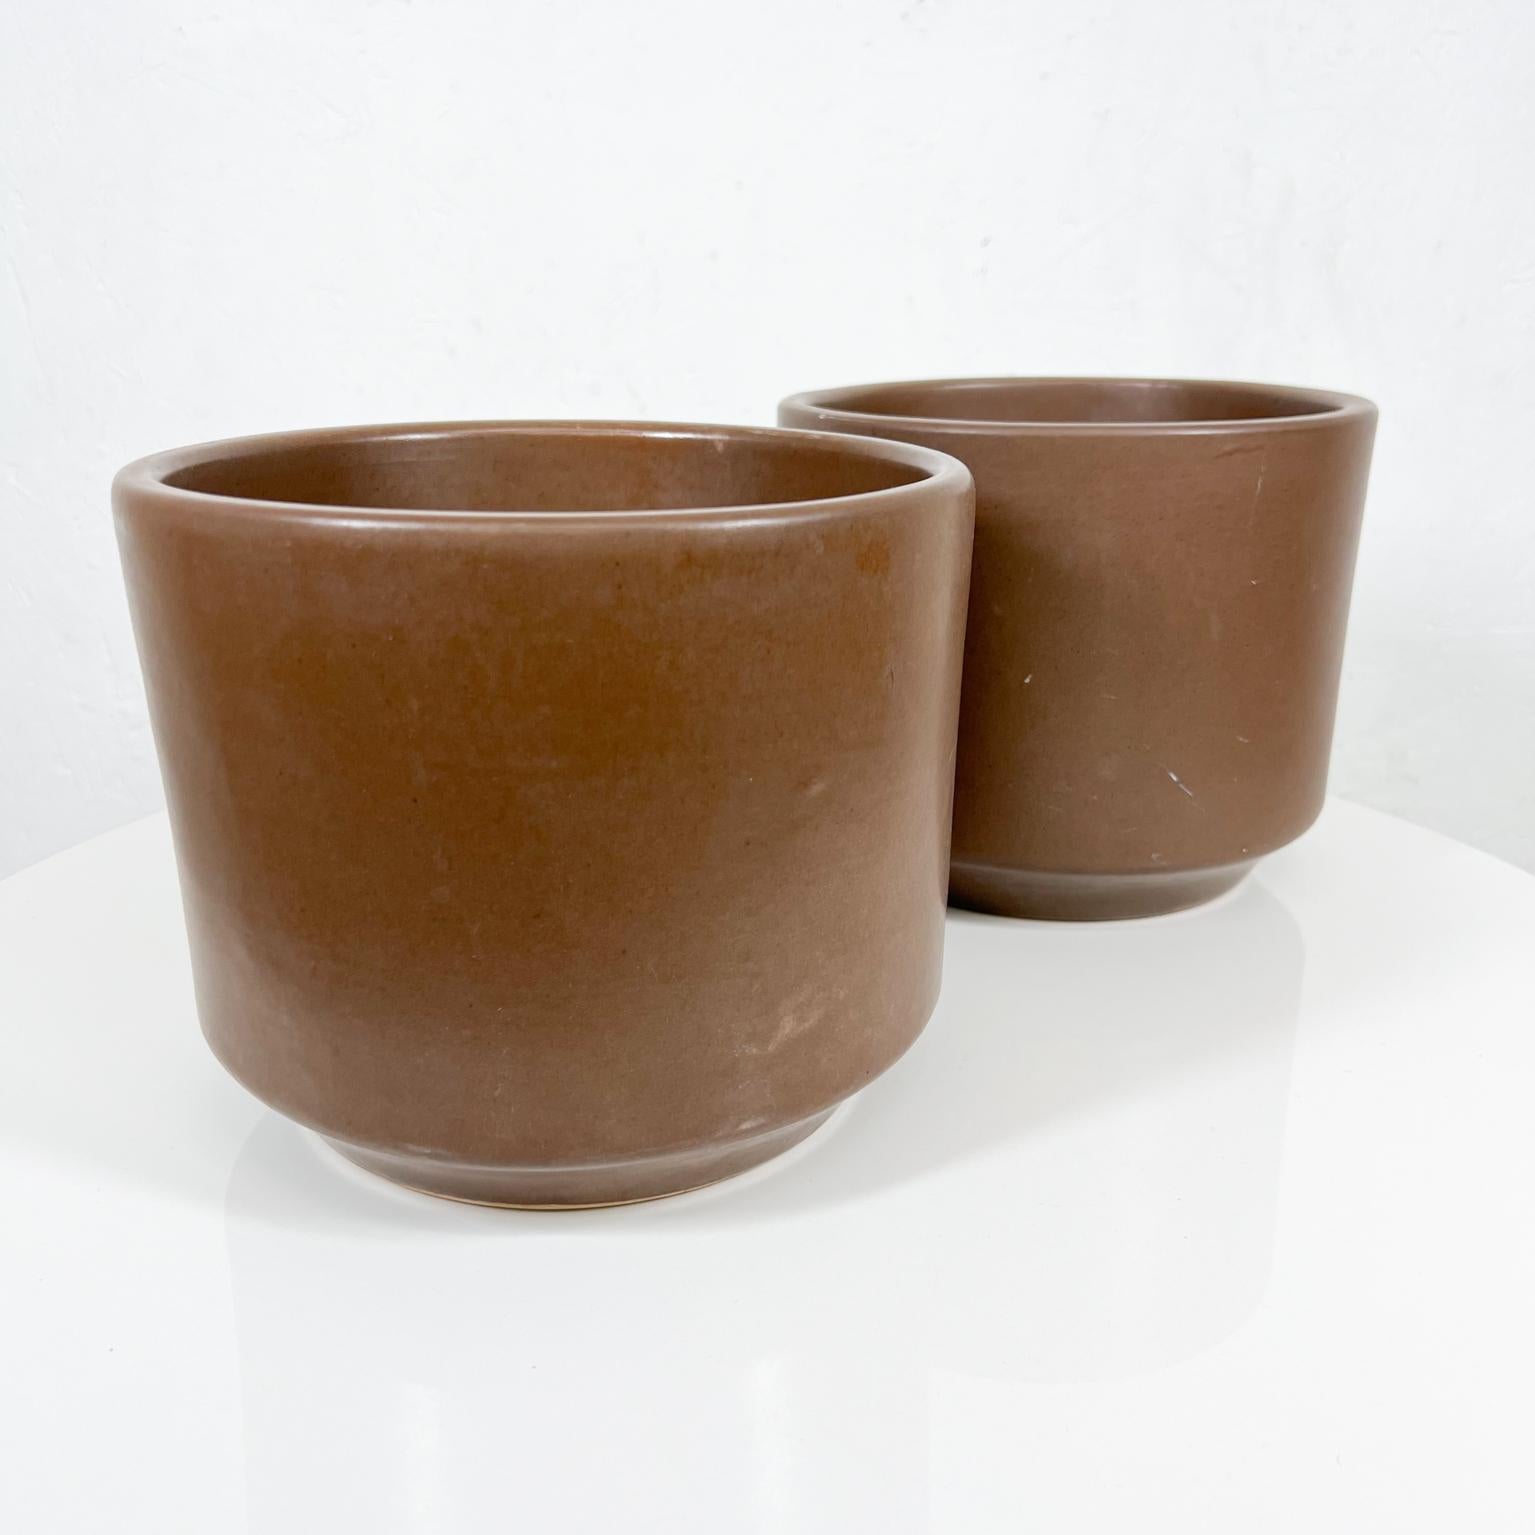 1960s Gainey Ceramics MCM Architectural Modern Pottery Planters La Verne Calif
Set includes two Planter Pots
Color Brown 
Maker stamped
Measures: 6.75 tall x 8.25 diameter
Preowned unrestored original vintage condition
See images provided.
 